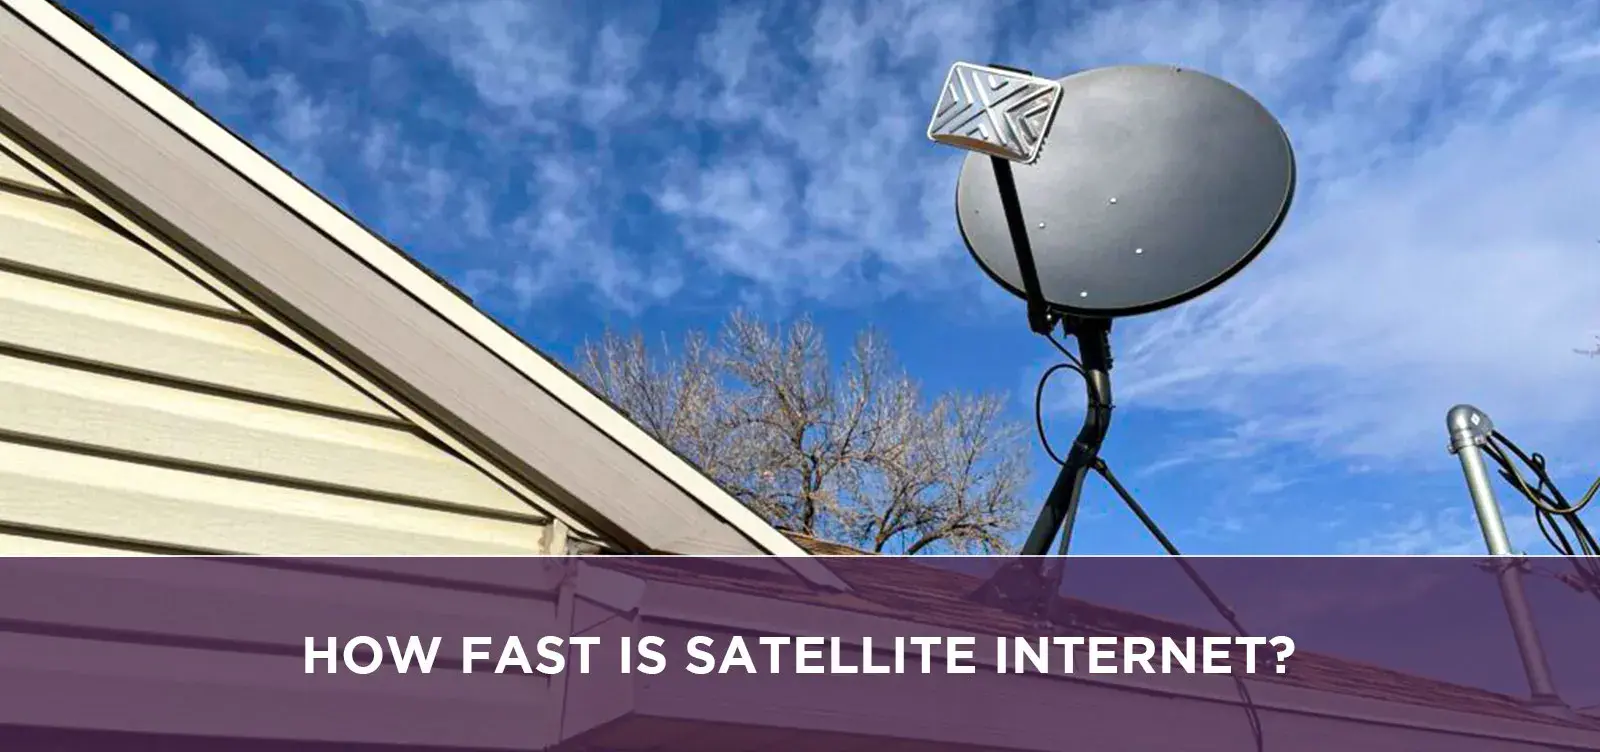 How fast is satellite internet?